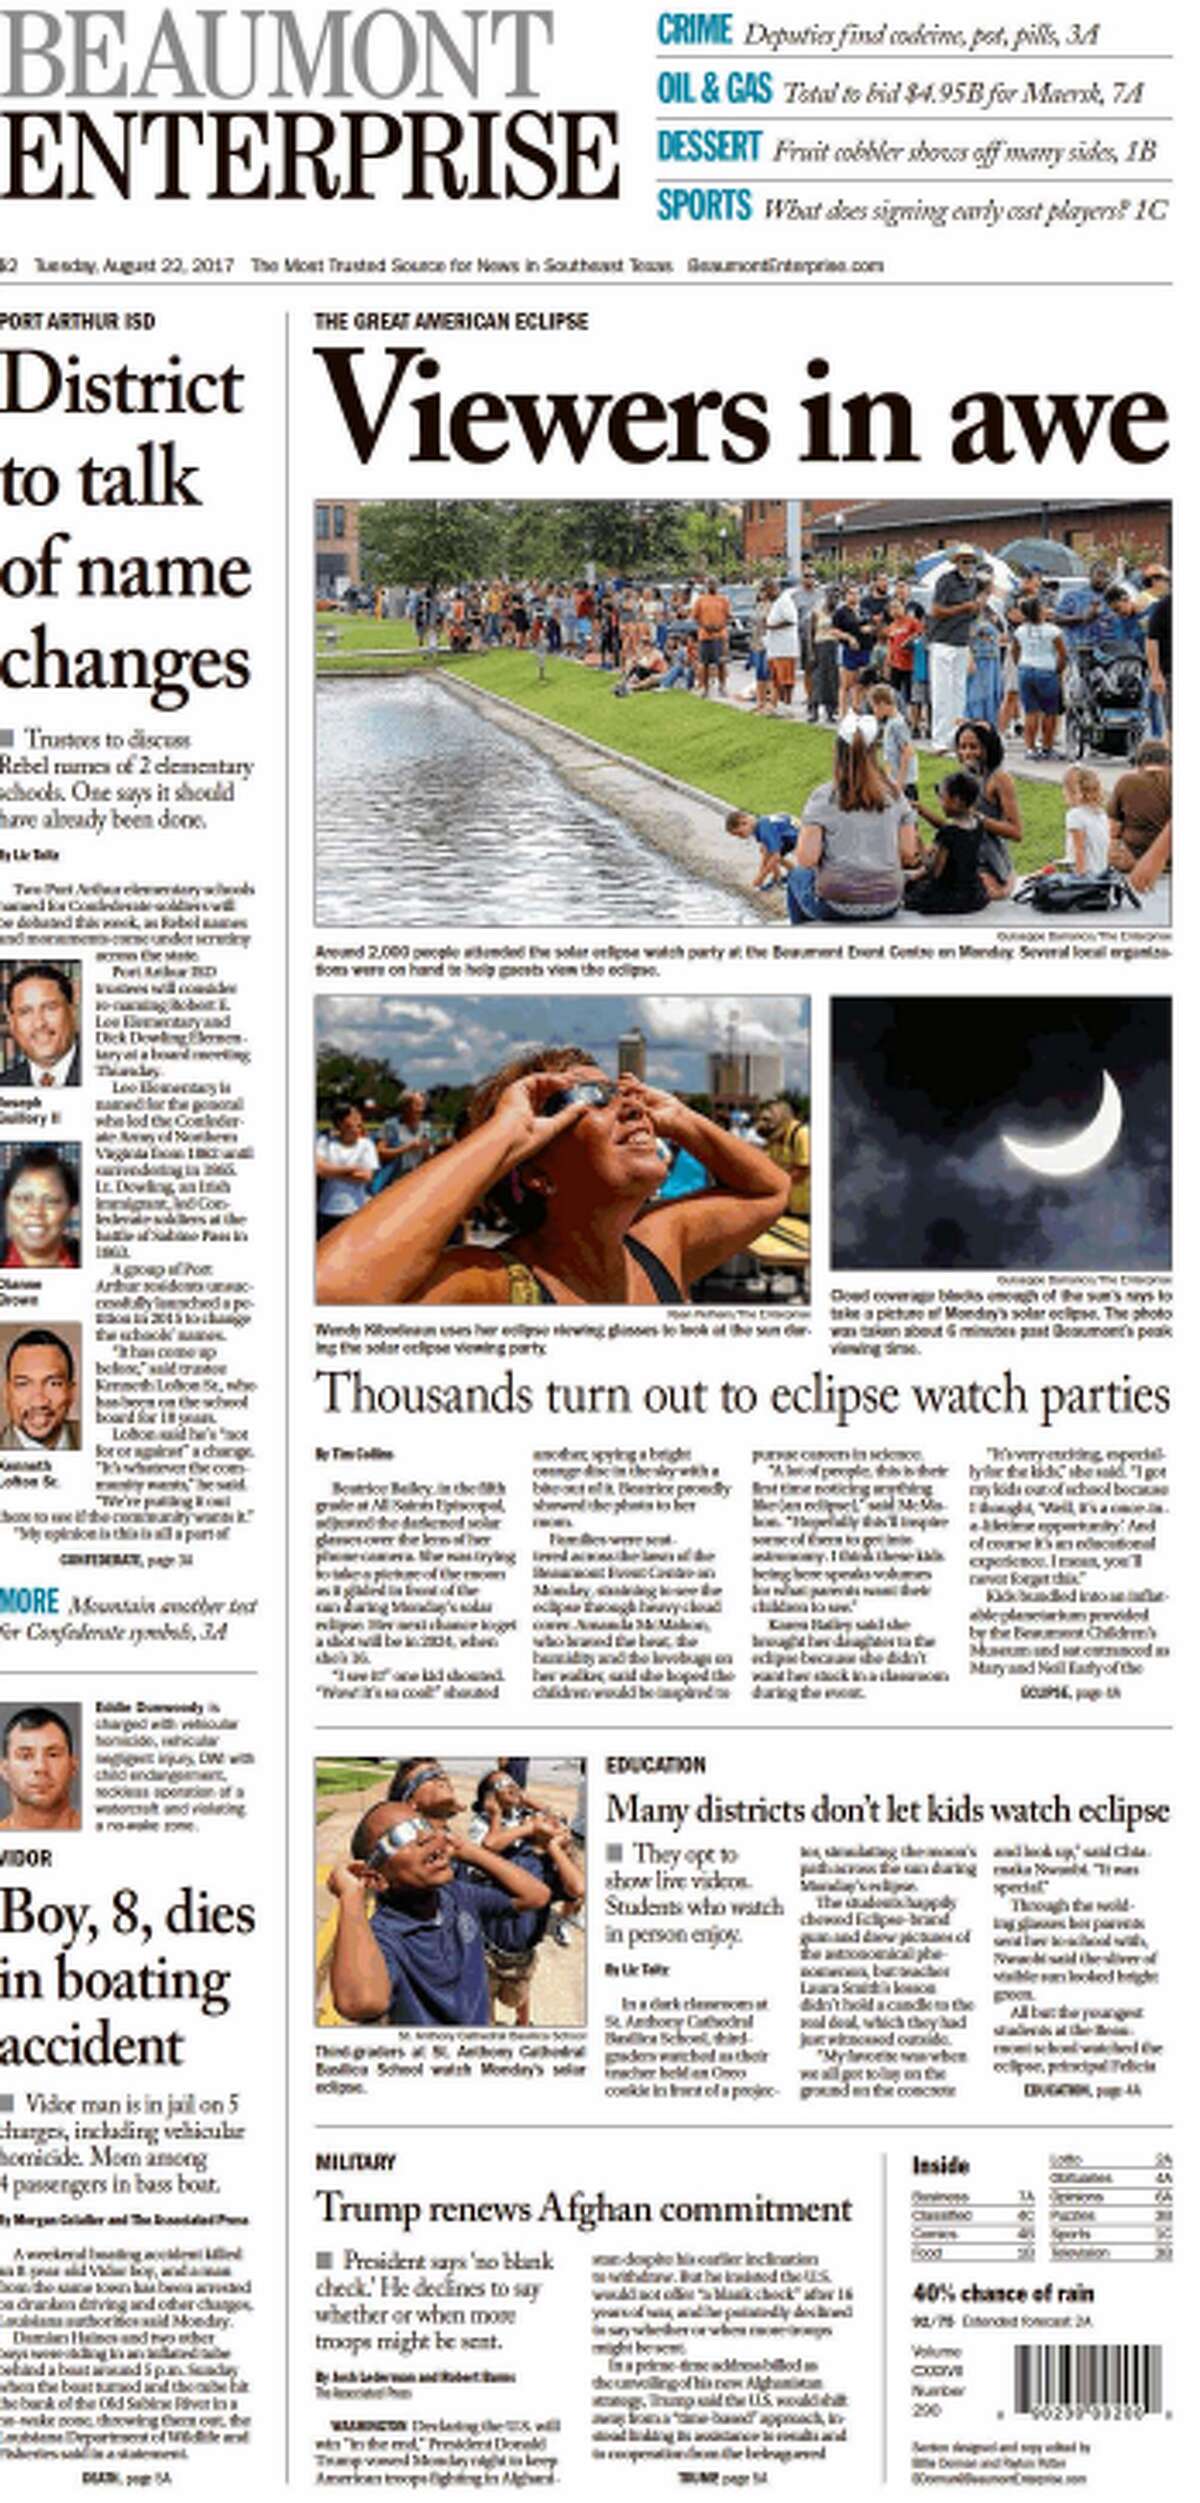 On this day five years ago, newspapers across the country recounted the previous day’s big event – one of the first solar eclipses I remember garnering such national attention.